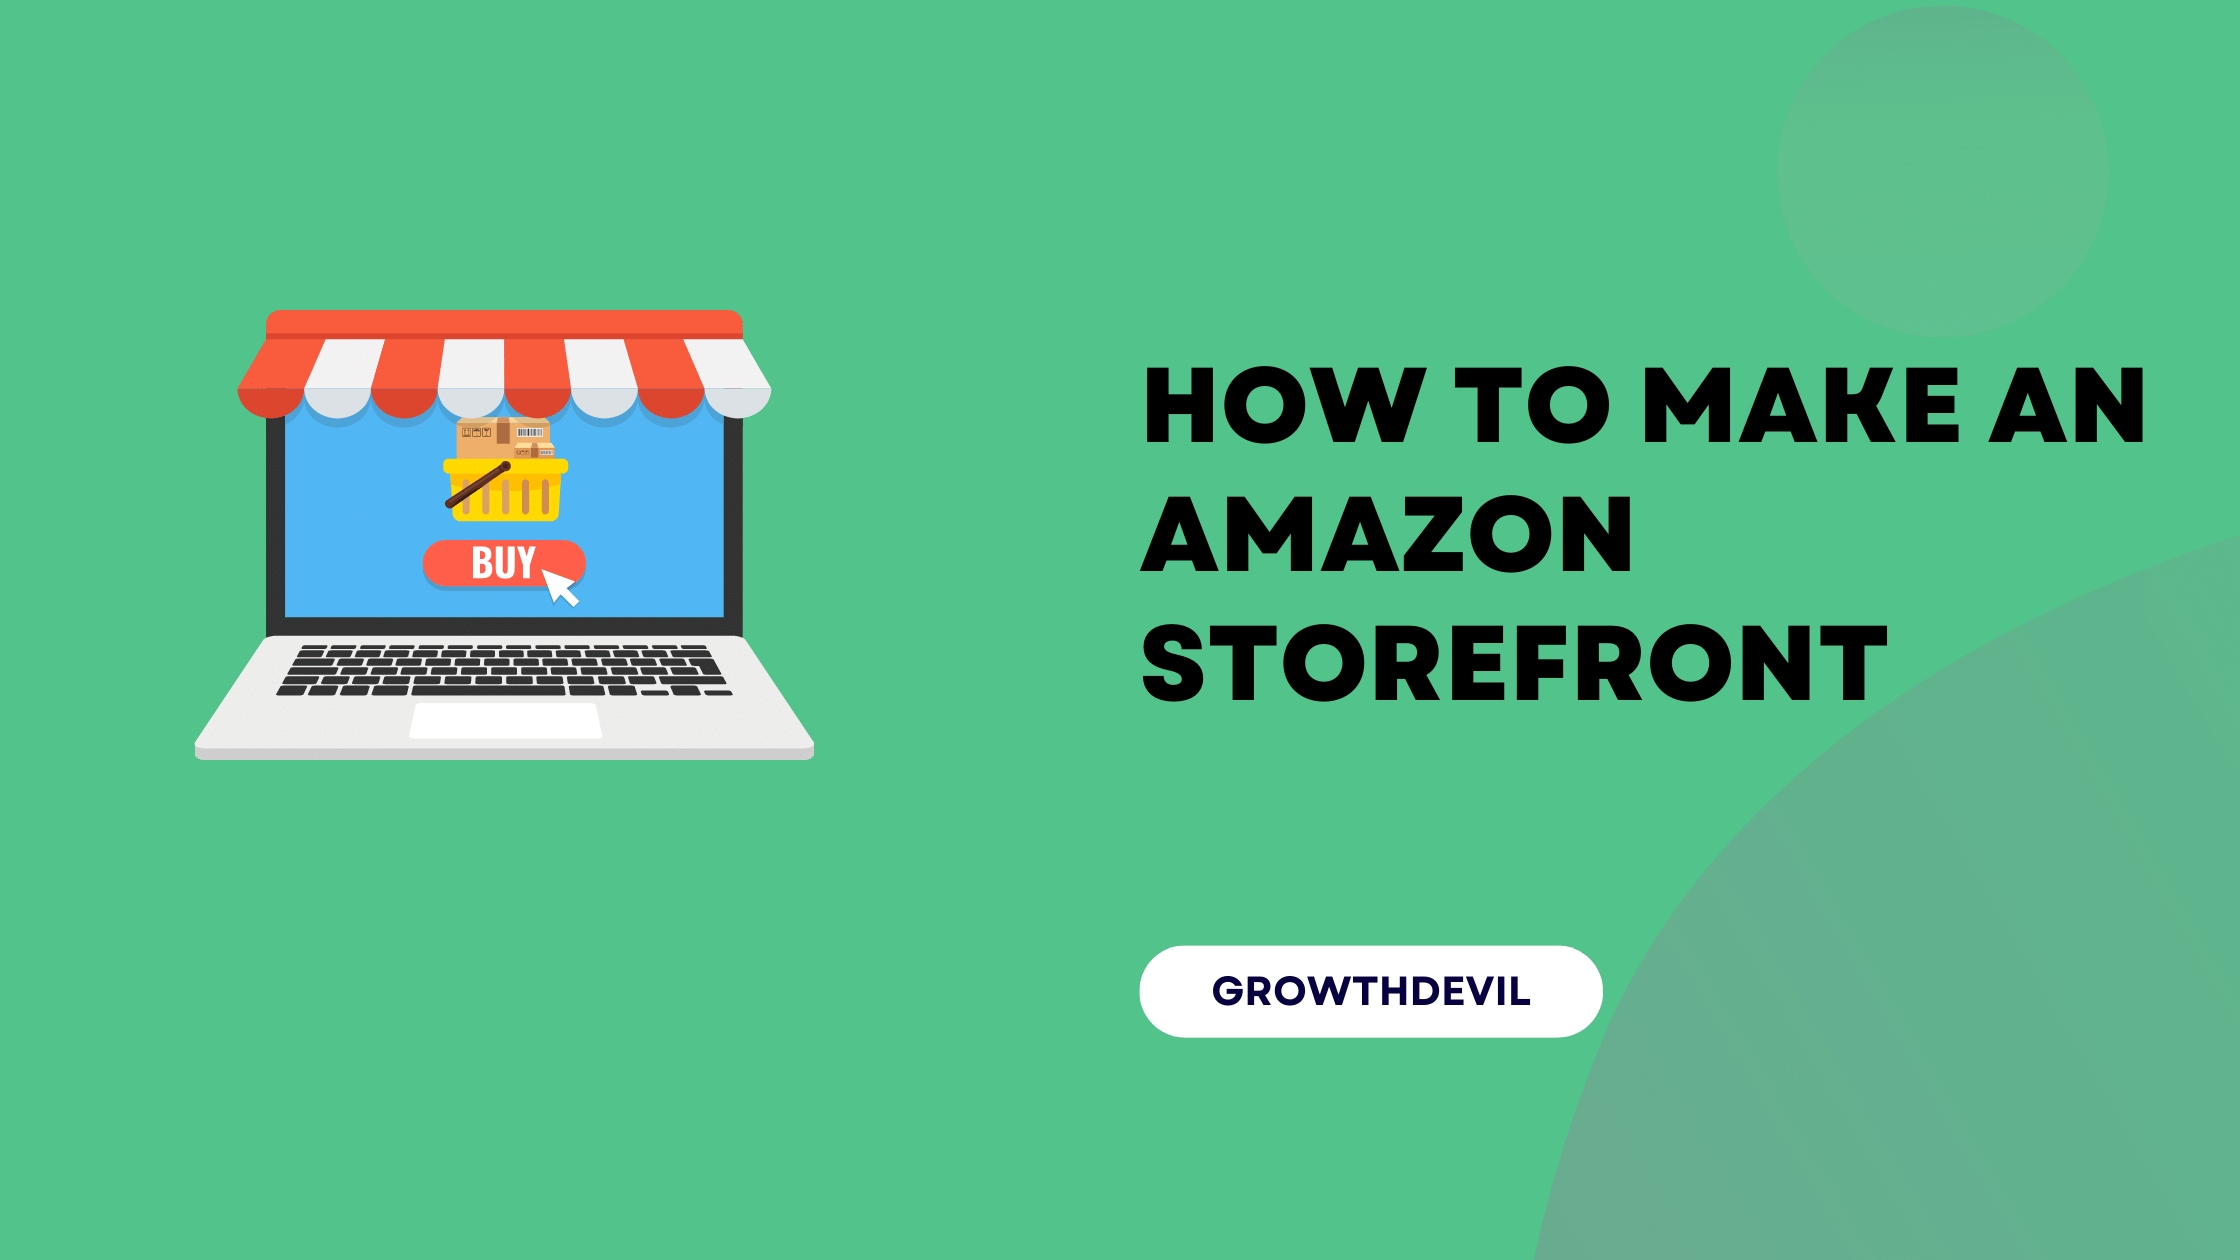 How To Make An Amazon Storefront - GrowthDevil